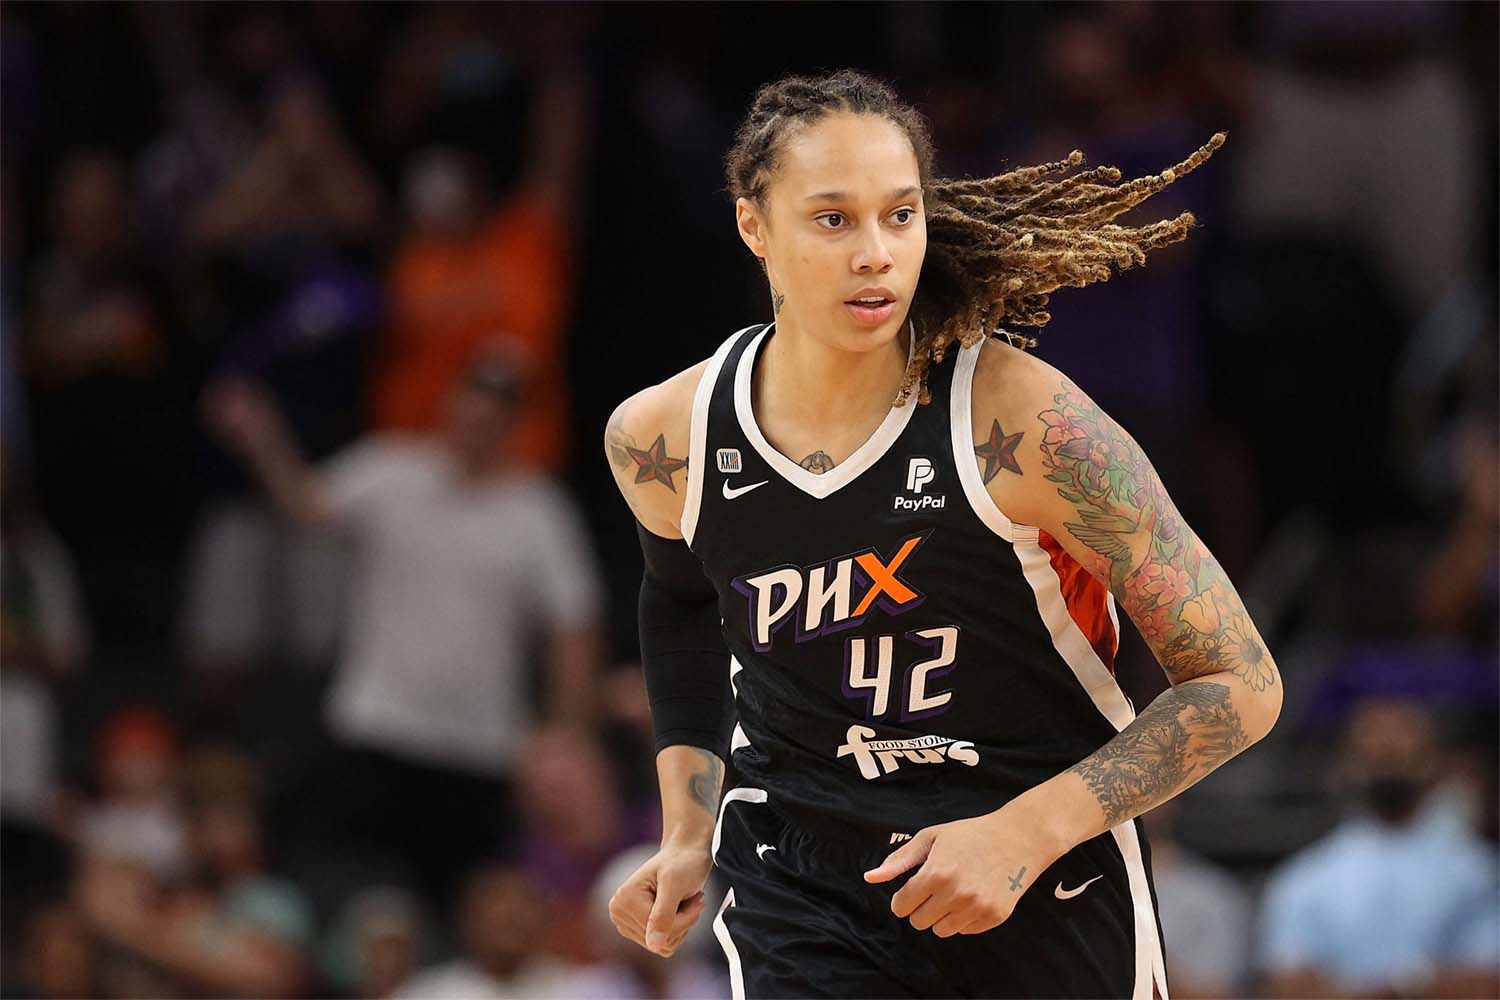 Brittney Griner was convicted by a Russian court on drugs charges in August and sentenced to nine years in prison